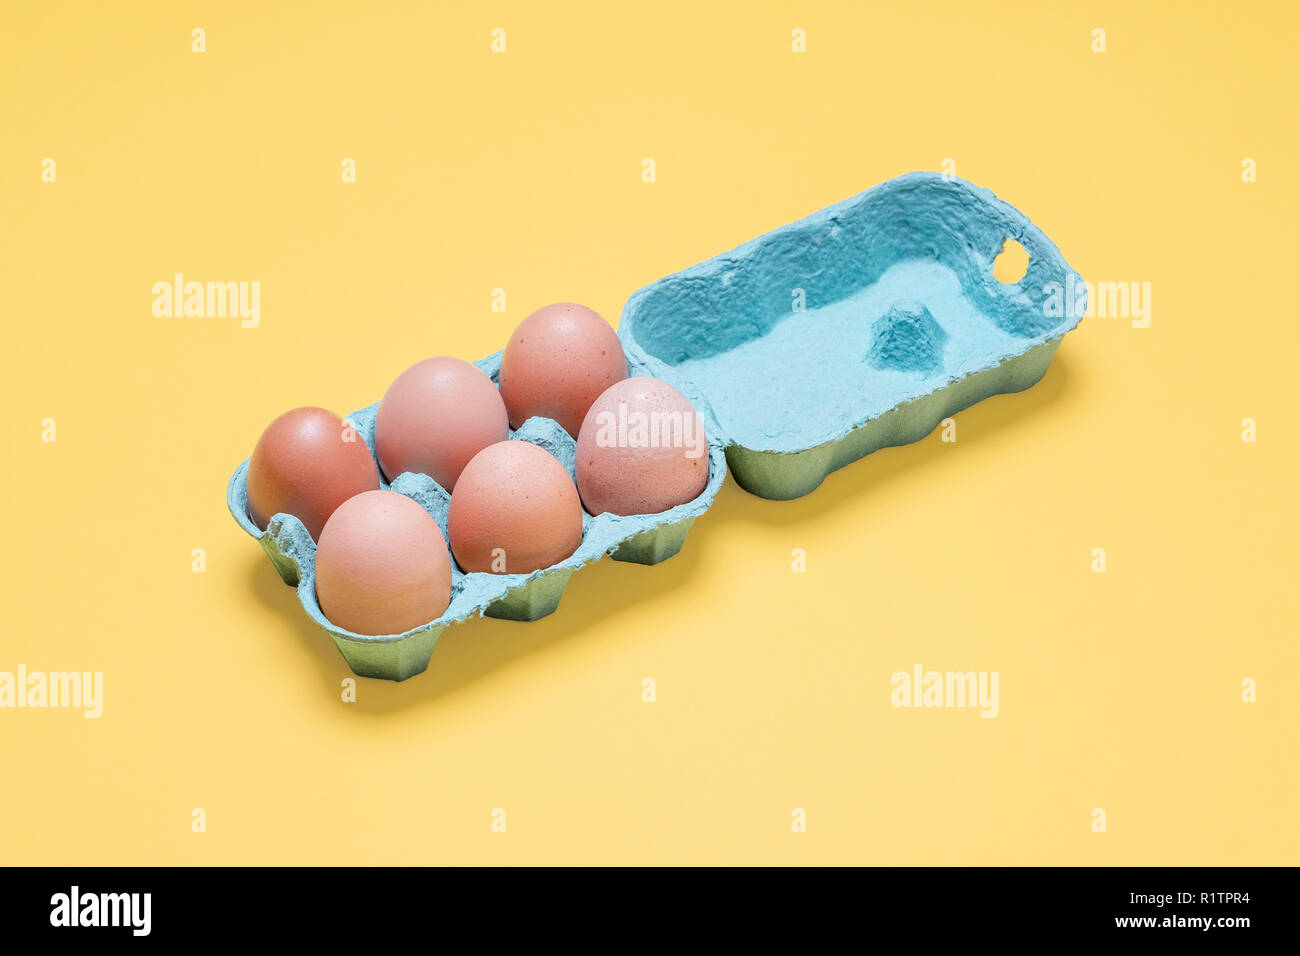 Half dozen free range organic brown eggs in carton.  Six brown eggs in crate container on a bright pastel yellow background Stock Photo